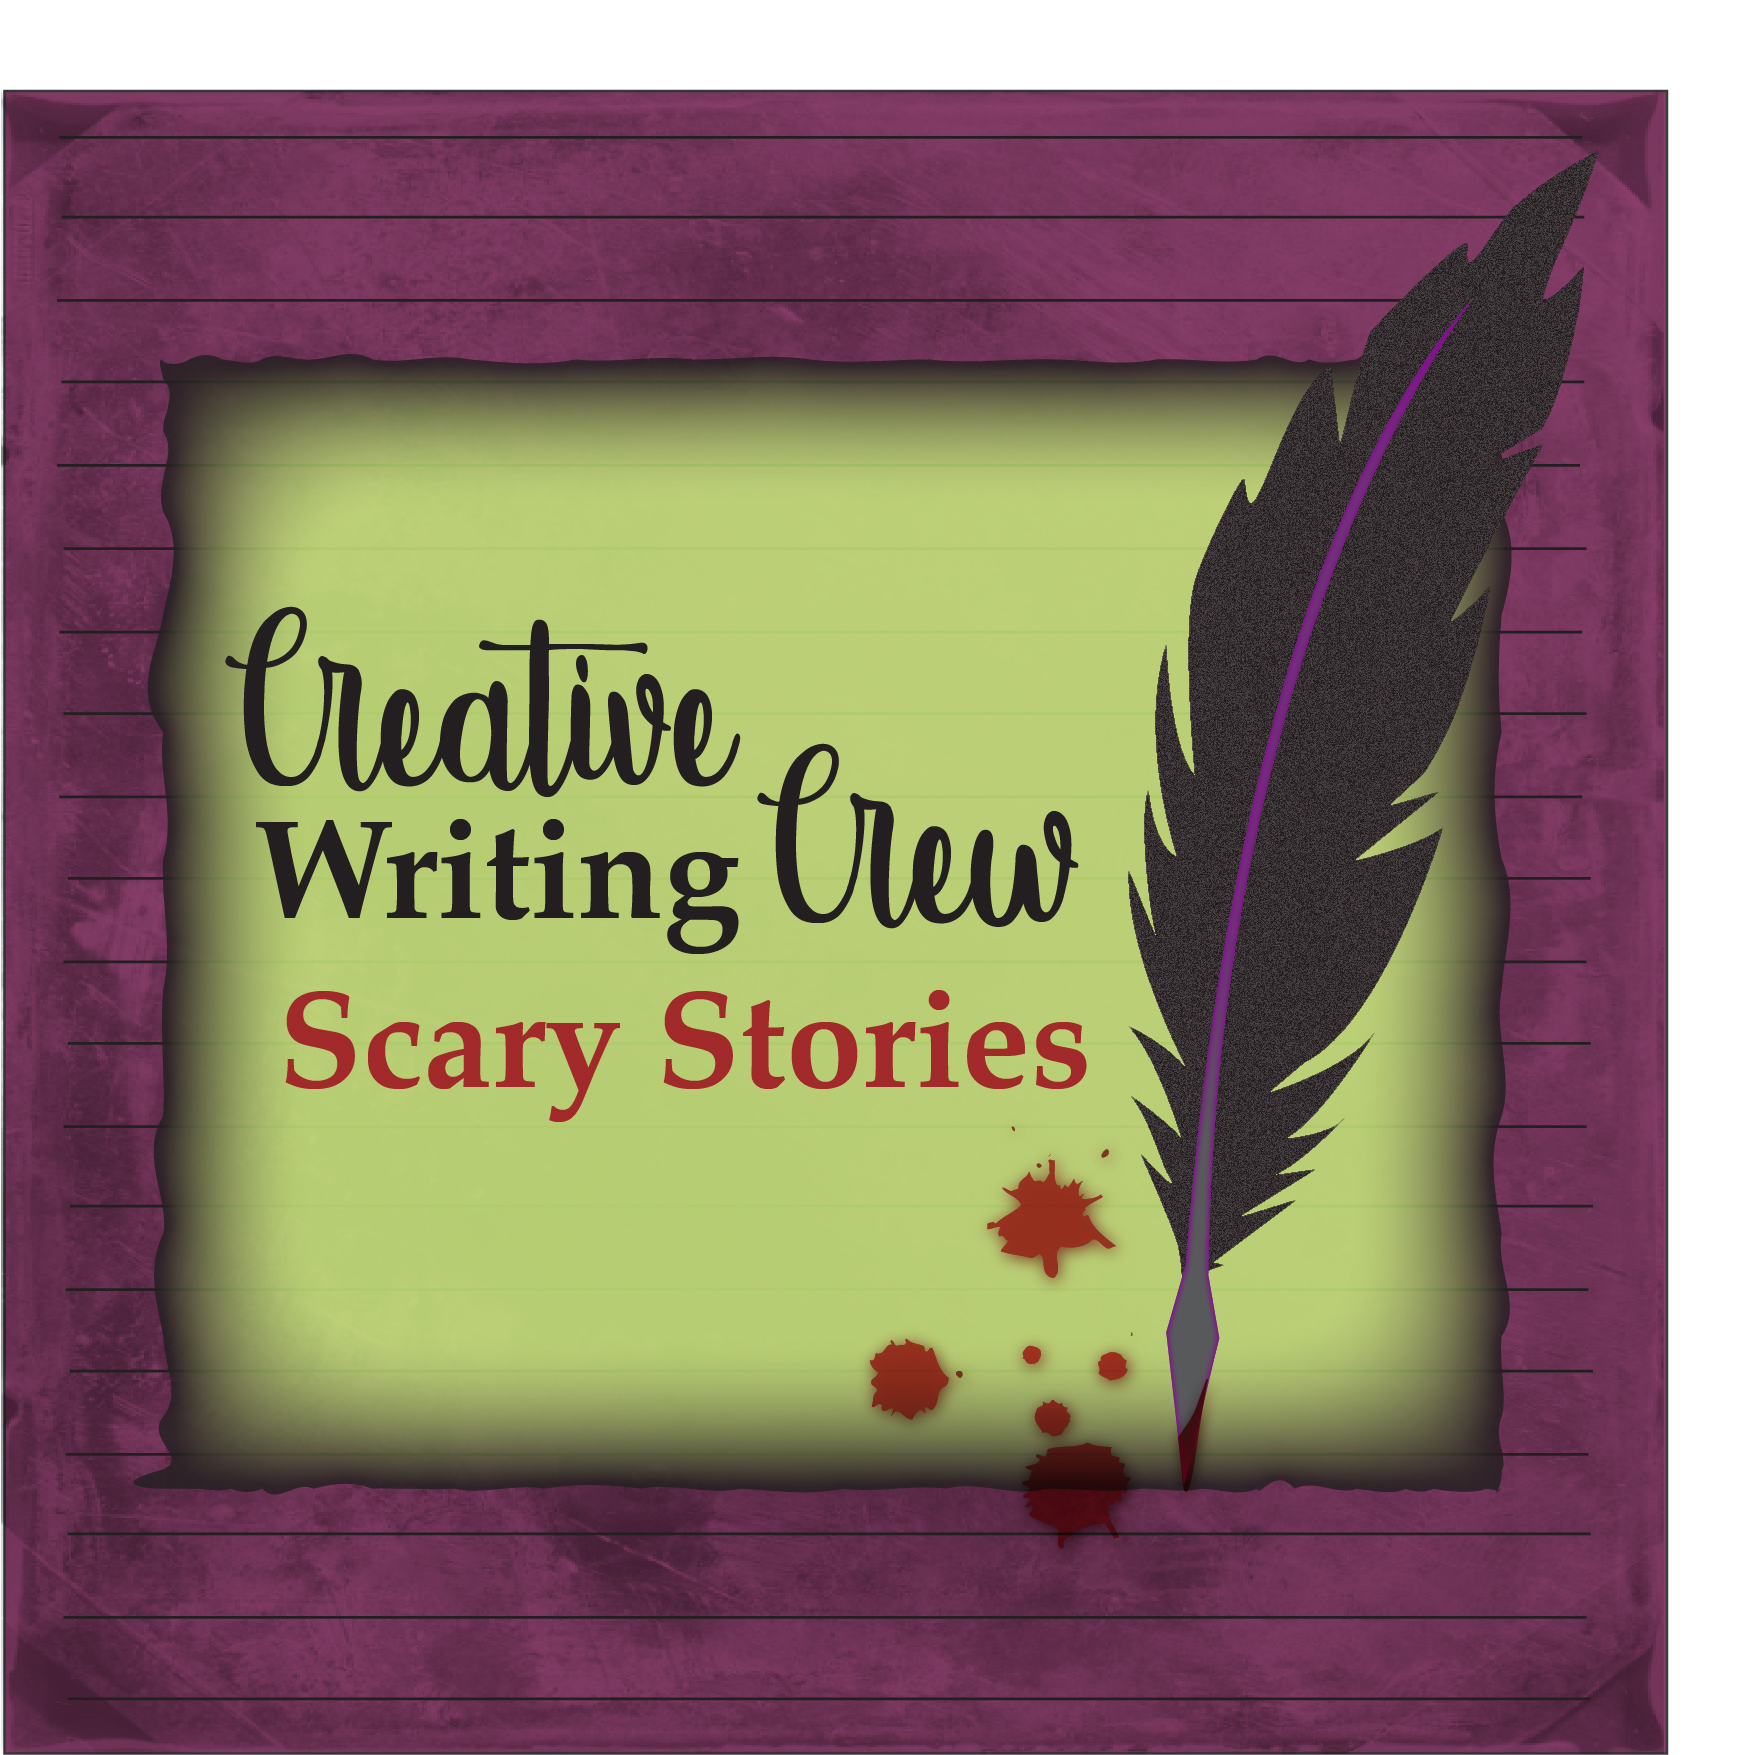 Creative Writing Crew Scary Stories